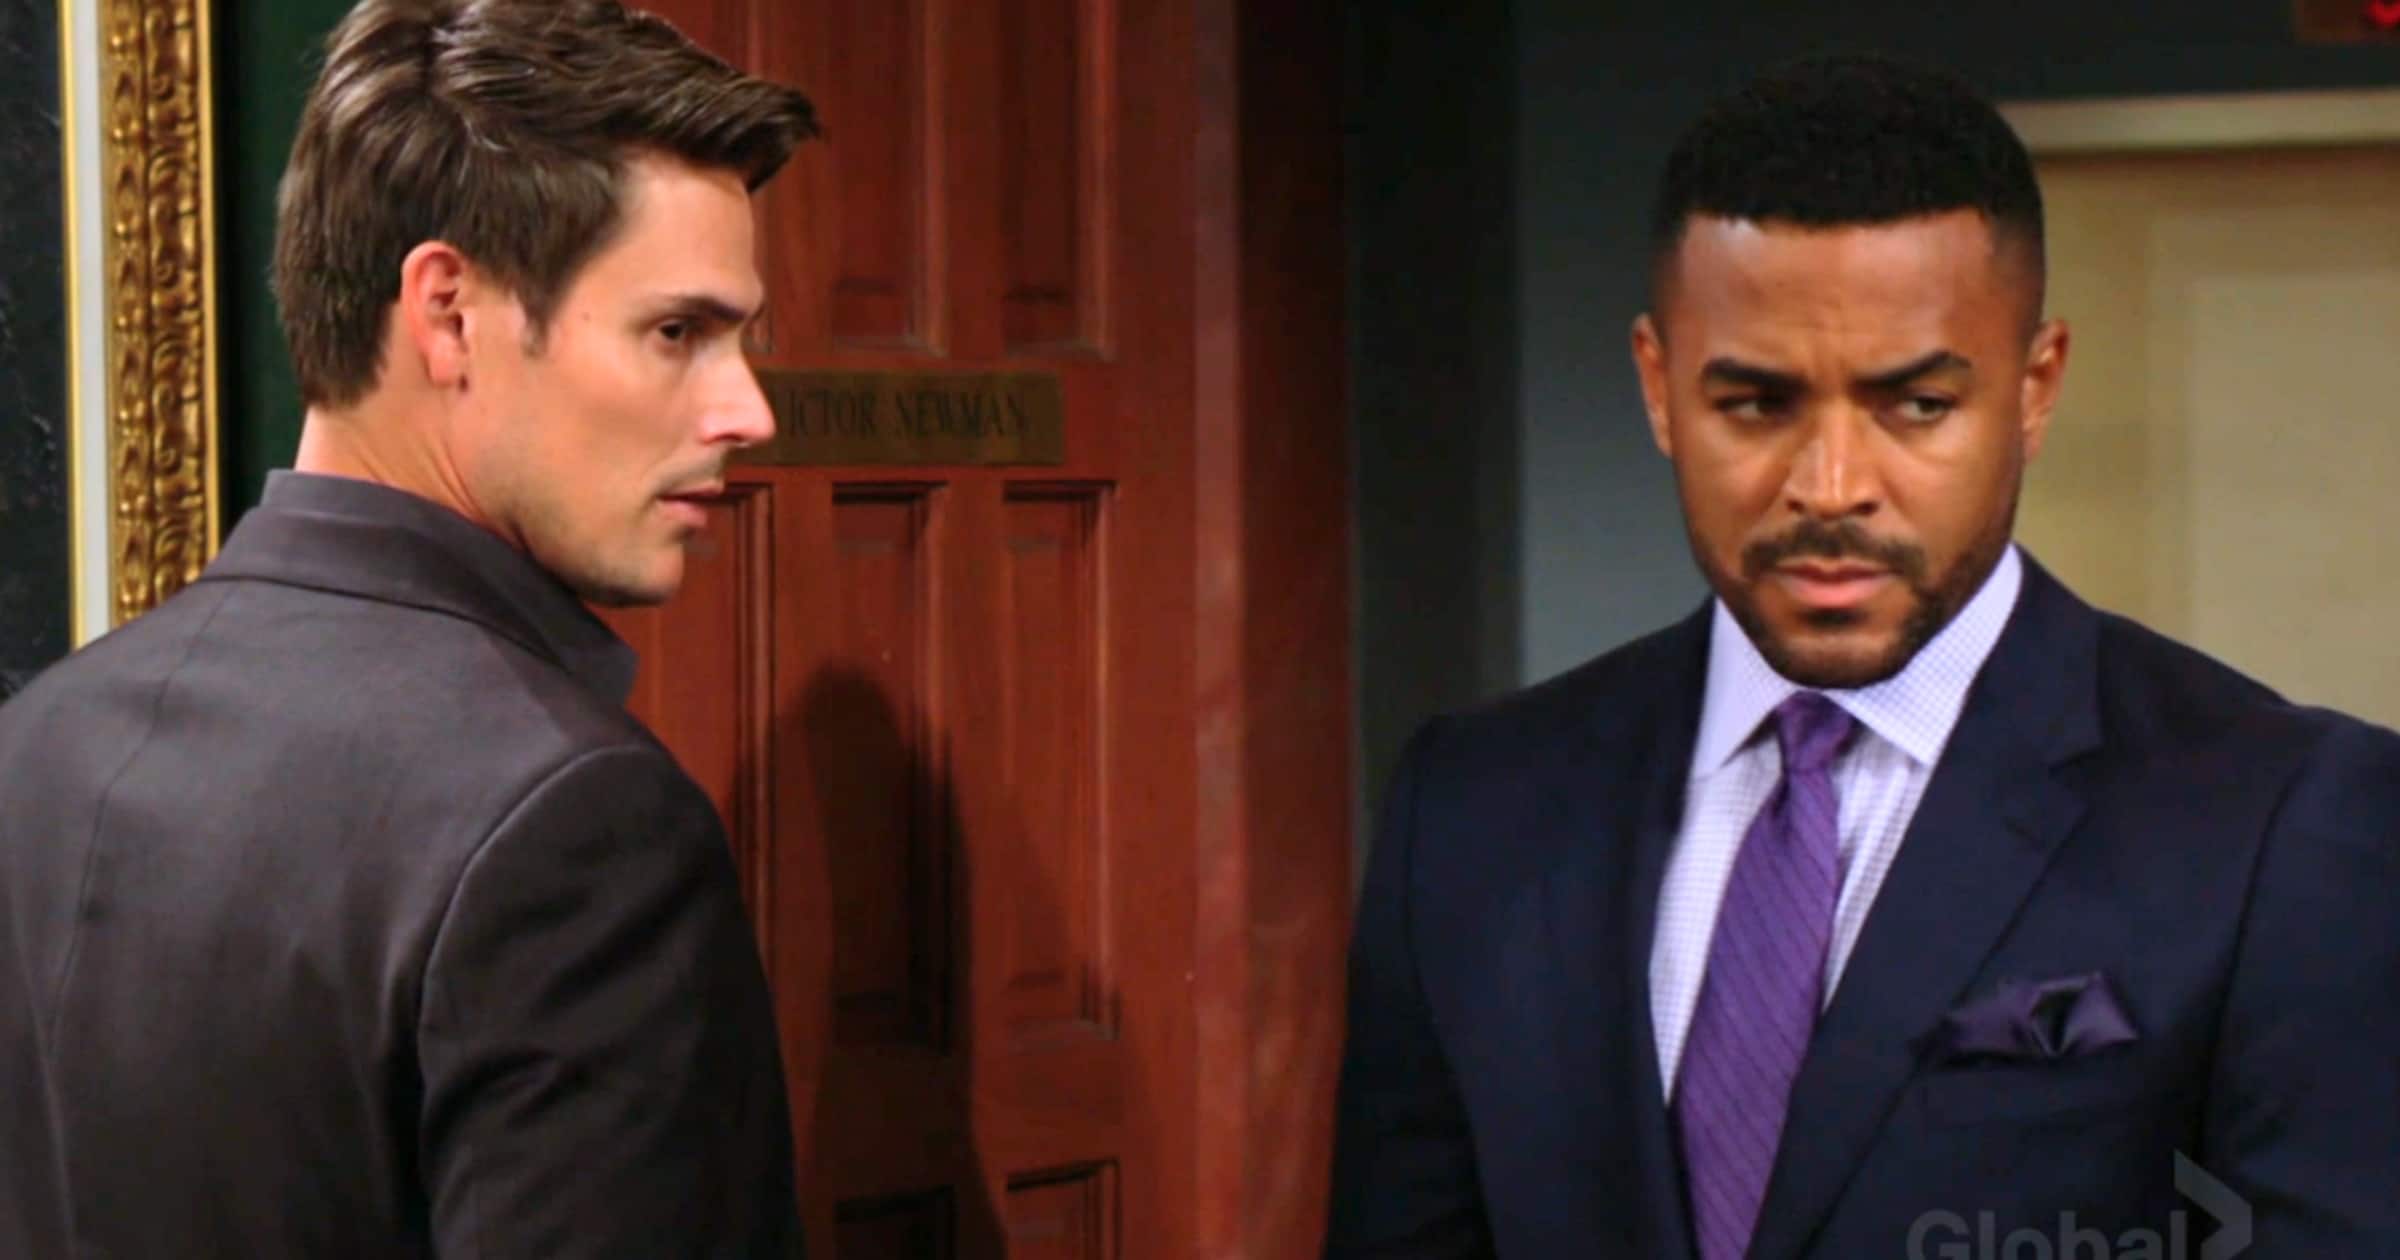 The Young and the Restless - Nov 3 - Adam and Nate